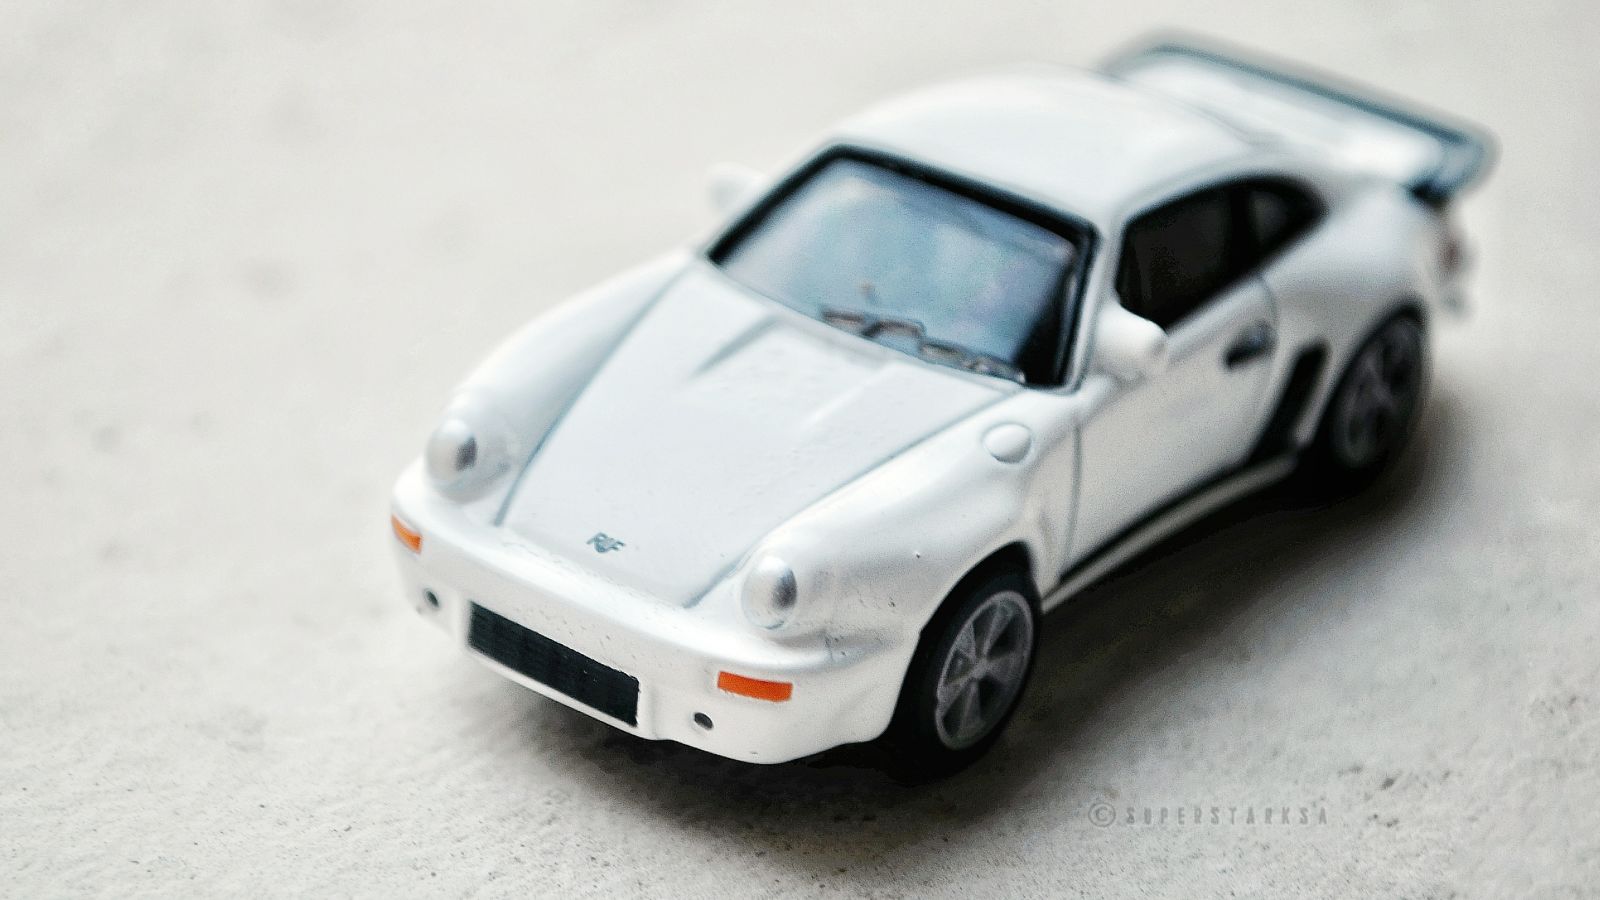 Illustration for article titled Rennsport Reunion: 1:72 UCC Coffee Special RUF 930 Turbo em/em